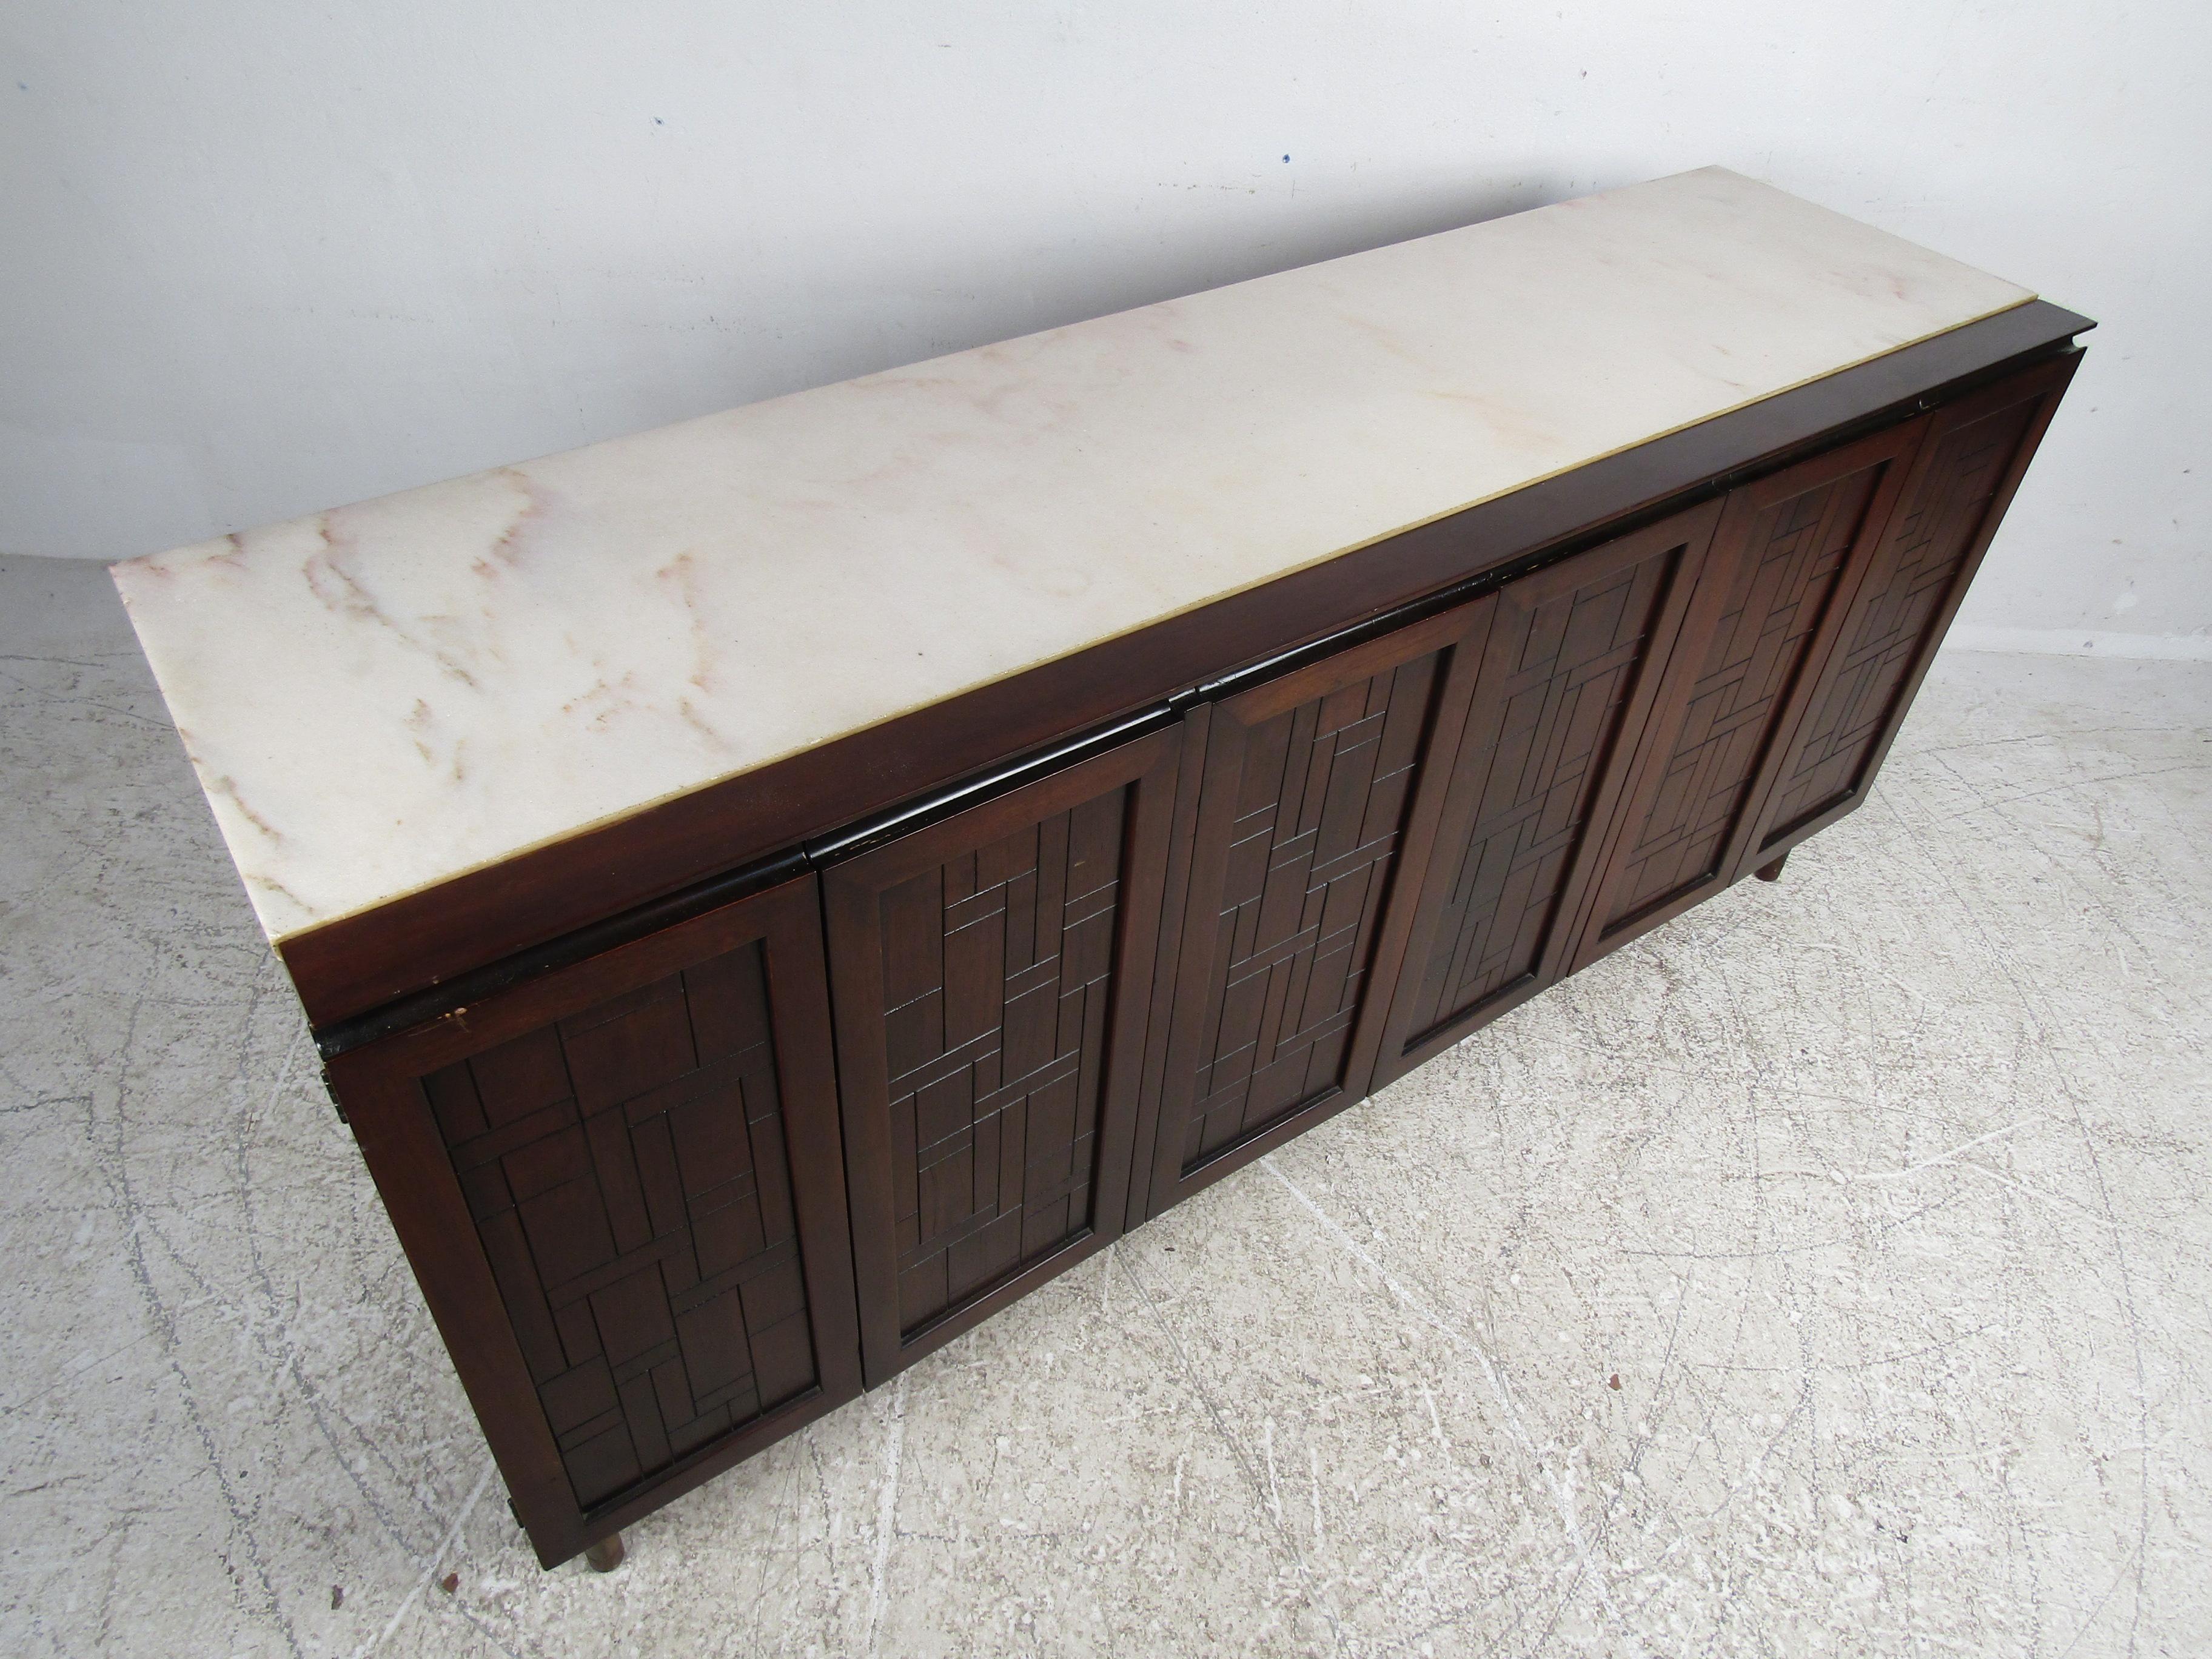 Impressive midcentury credenza from John Stuart, designed by Bert England. A handsome piece with brutalist style panels lining the cabinet fronts. Hinged cabinet doors open to reveal drawers with dovetail joinery and sculpted pulls, along with a